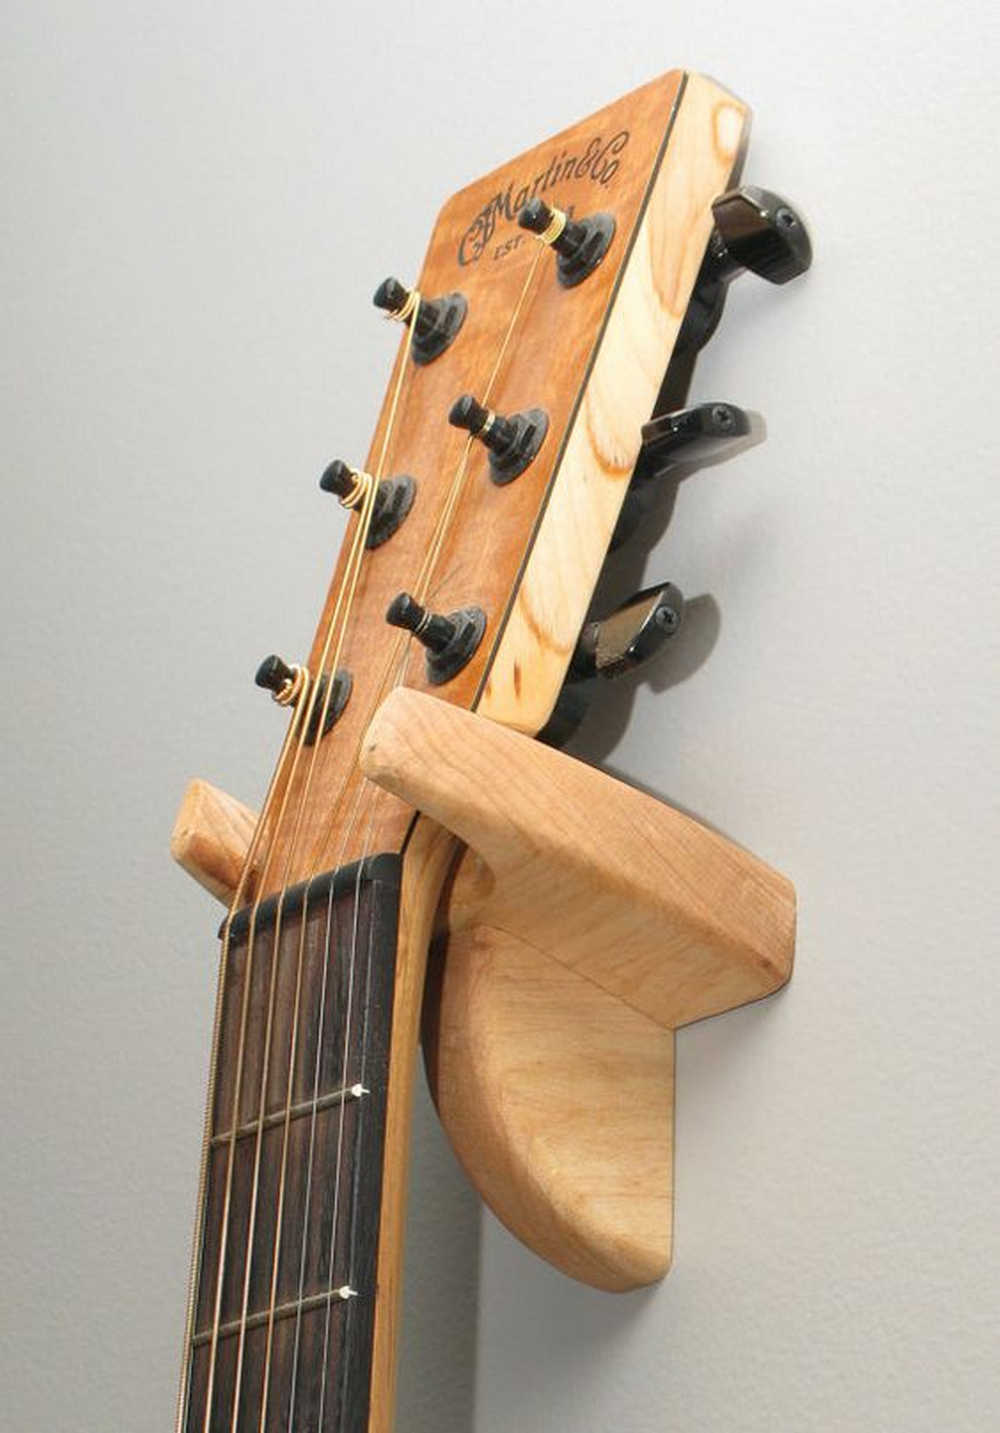 How to Build Your Own Guitar Hanger - DIY projects for ...